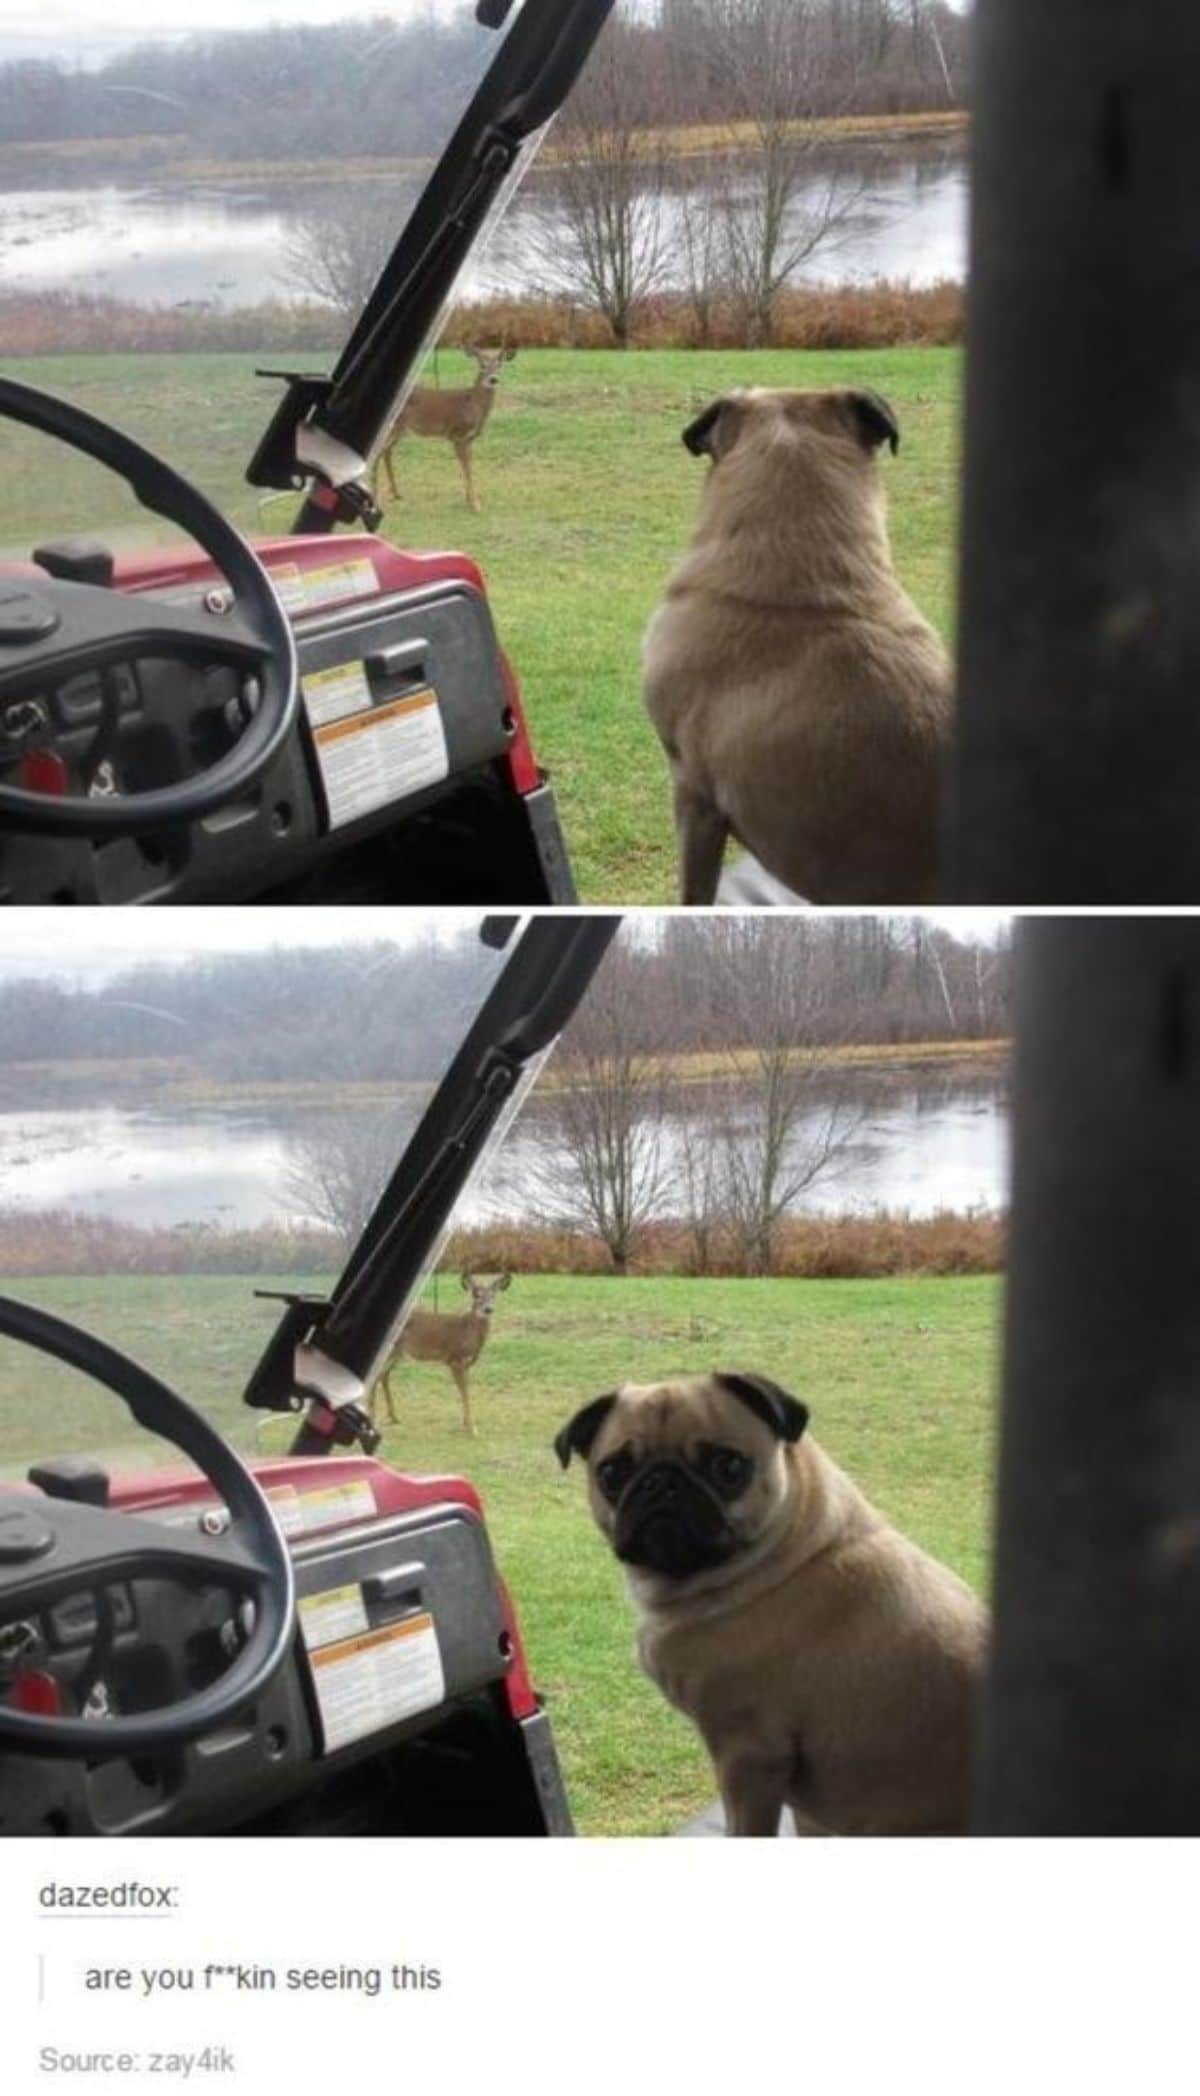 tumblr post of 2 photos of a brown pug in a vehicle looking at a deer with caption saying are you fkin seeing this